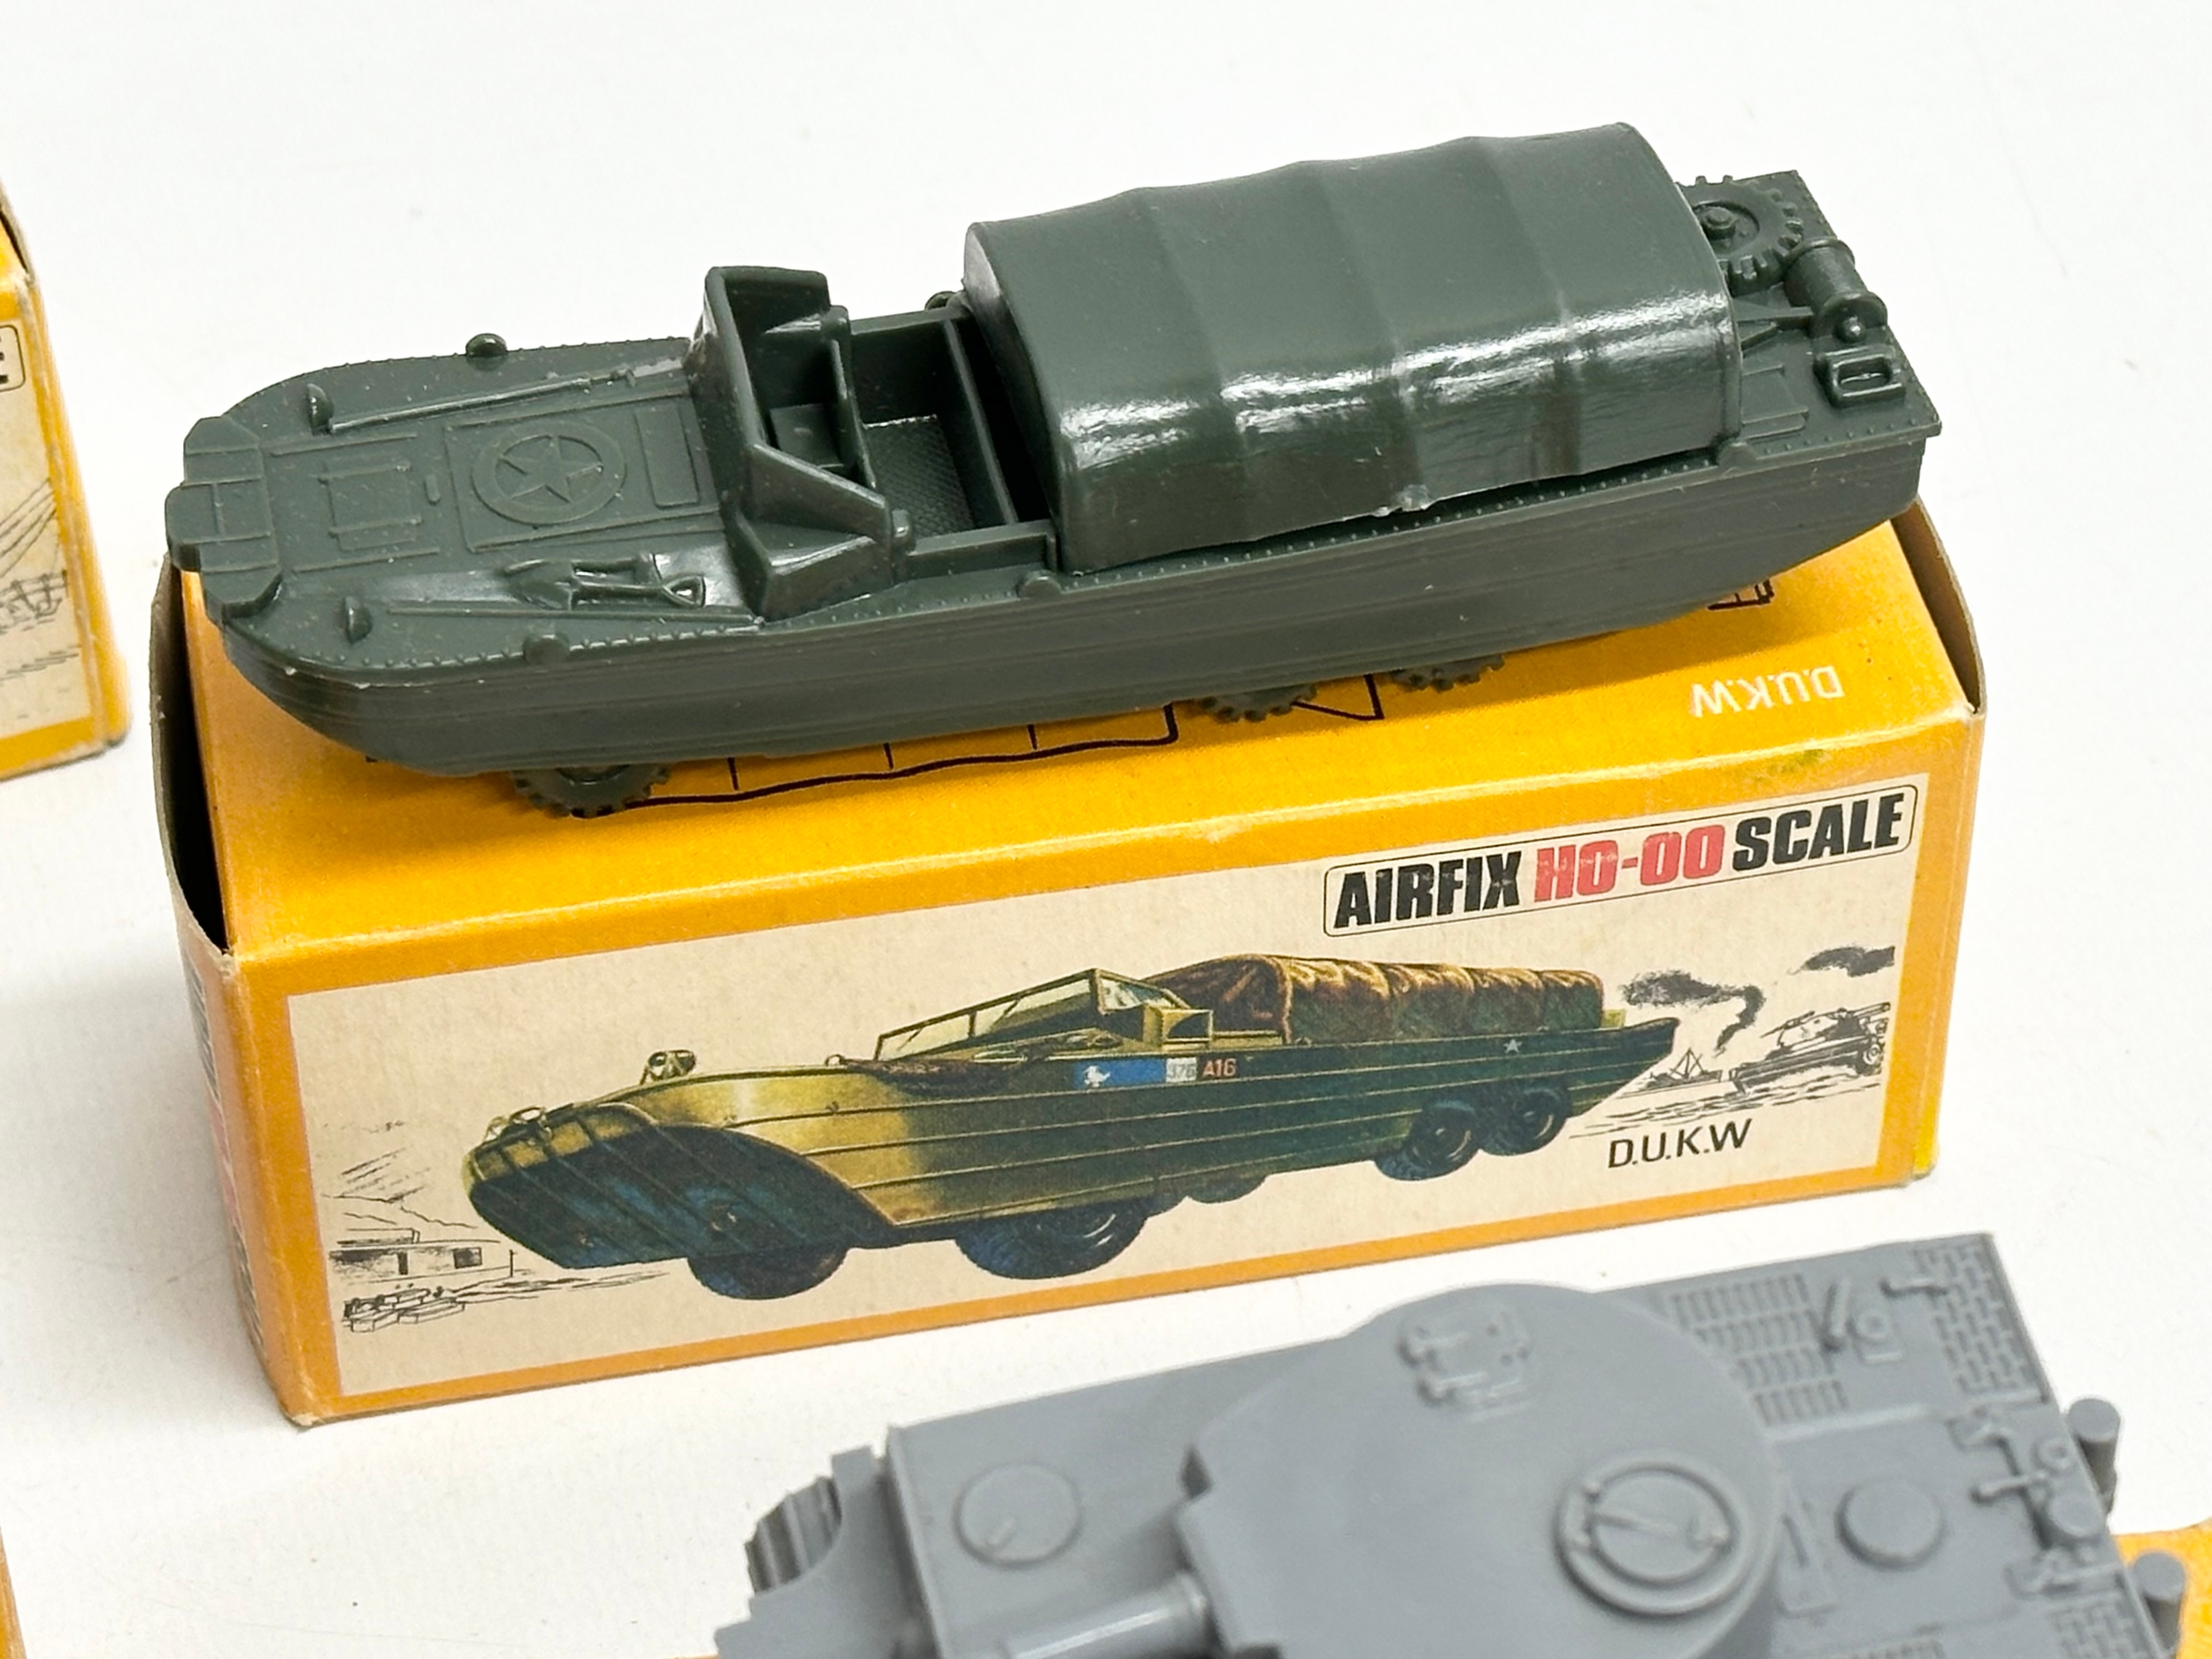 A collection of vintage Airfix HO-OO scale vehicles with boxes and soldiers. - Image 8 of 12